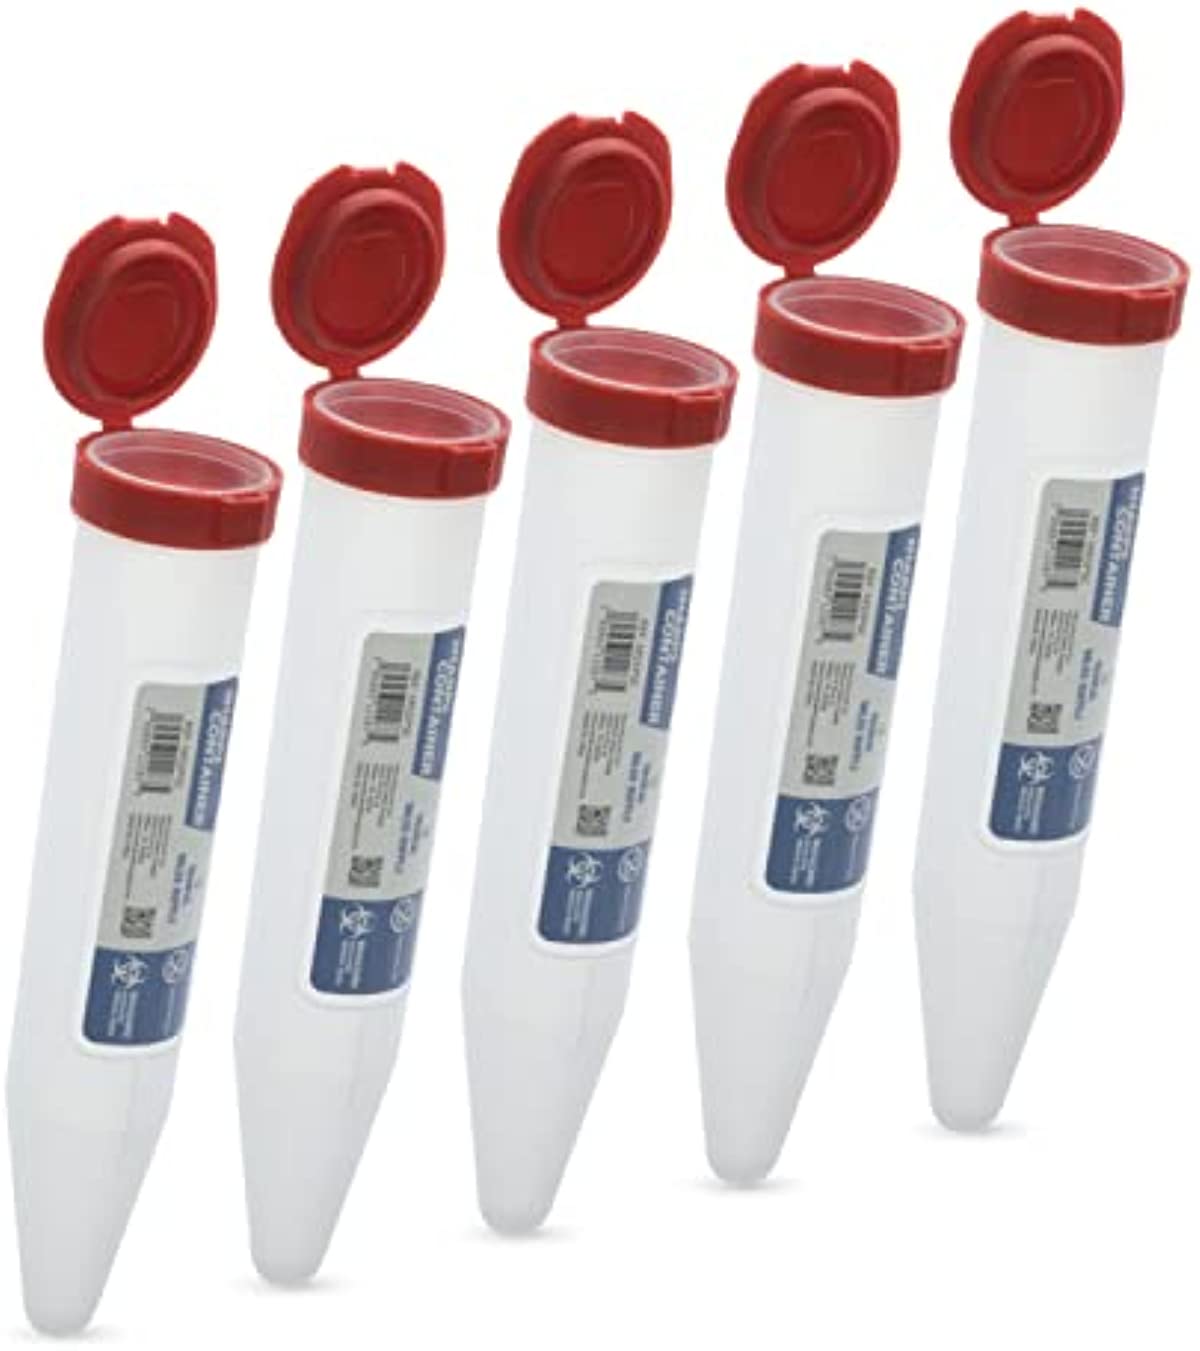 Portable First Aid Transportable Sharps Container with Locking Mechanism by Medical Sales Supply (Pack of 5)